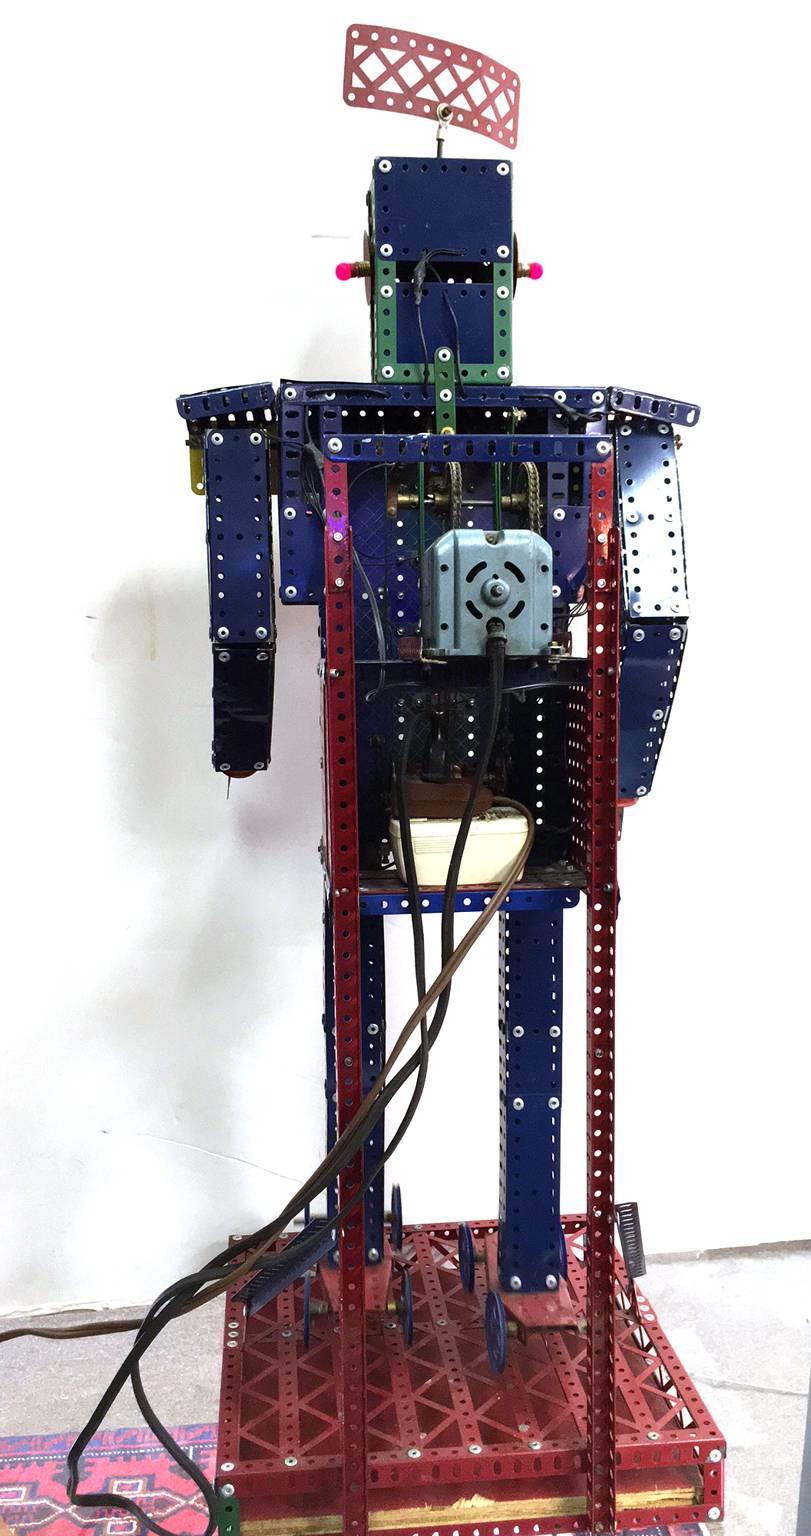 Vintage Meccano toy company electrified erector set store display robot. Lights up multiple bulbs as well as moves arm and legs in a roller skating motion. The Meccano company was founded in 1898 and all kits were produced in London until about